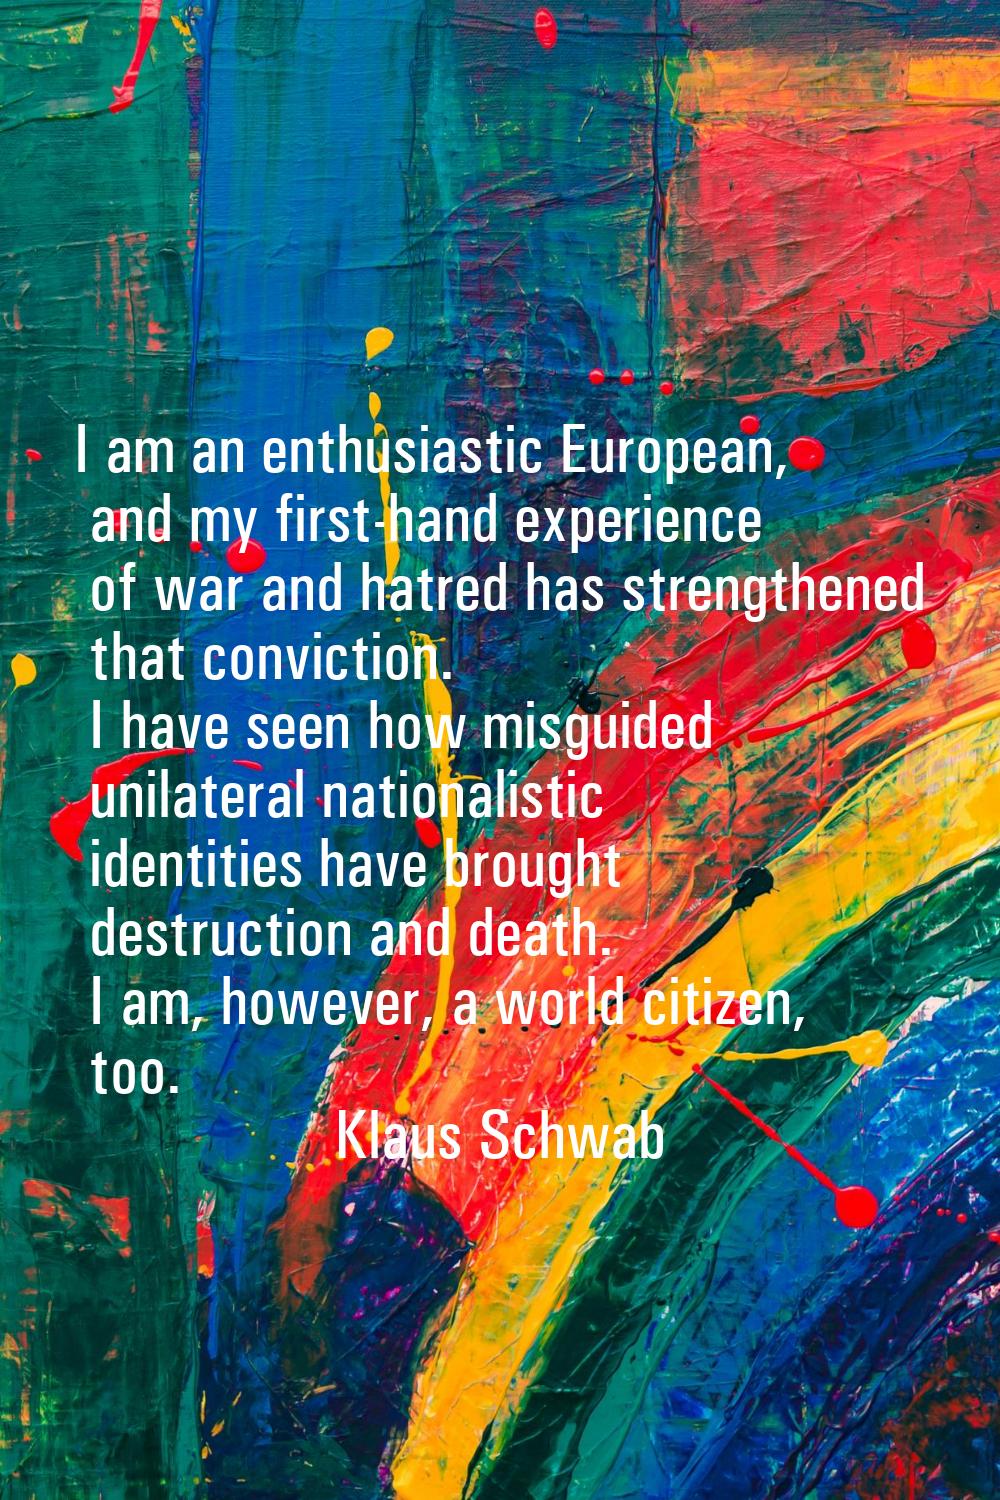 I am an enthusiastic European, and my first-hand experience of war and hatred has strengthened that